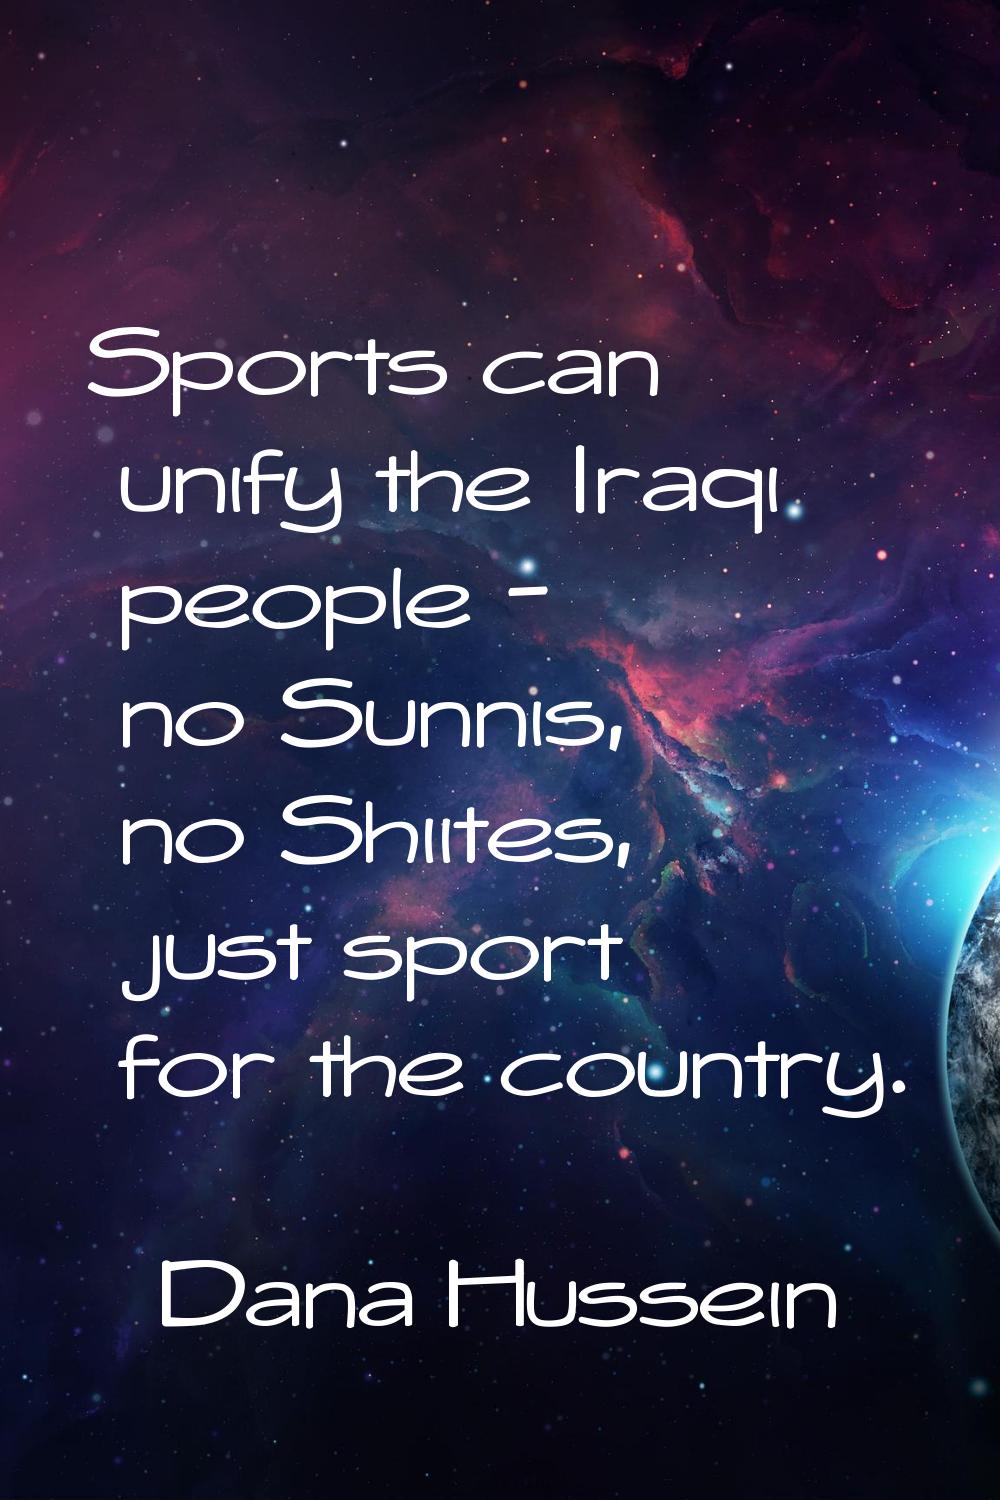 Sports can unify the Iraqi people - no Sunnis, no Shiites, just sport for the country.